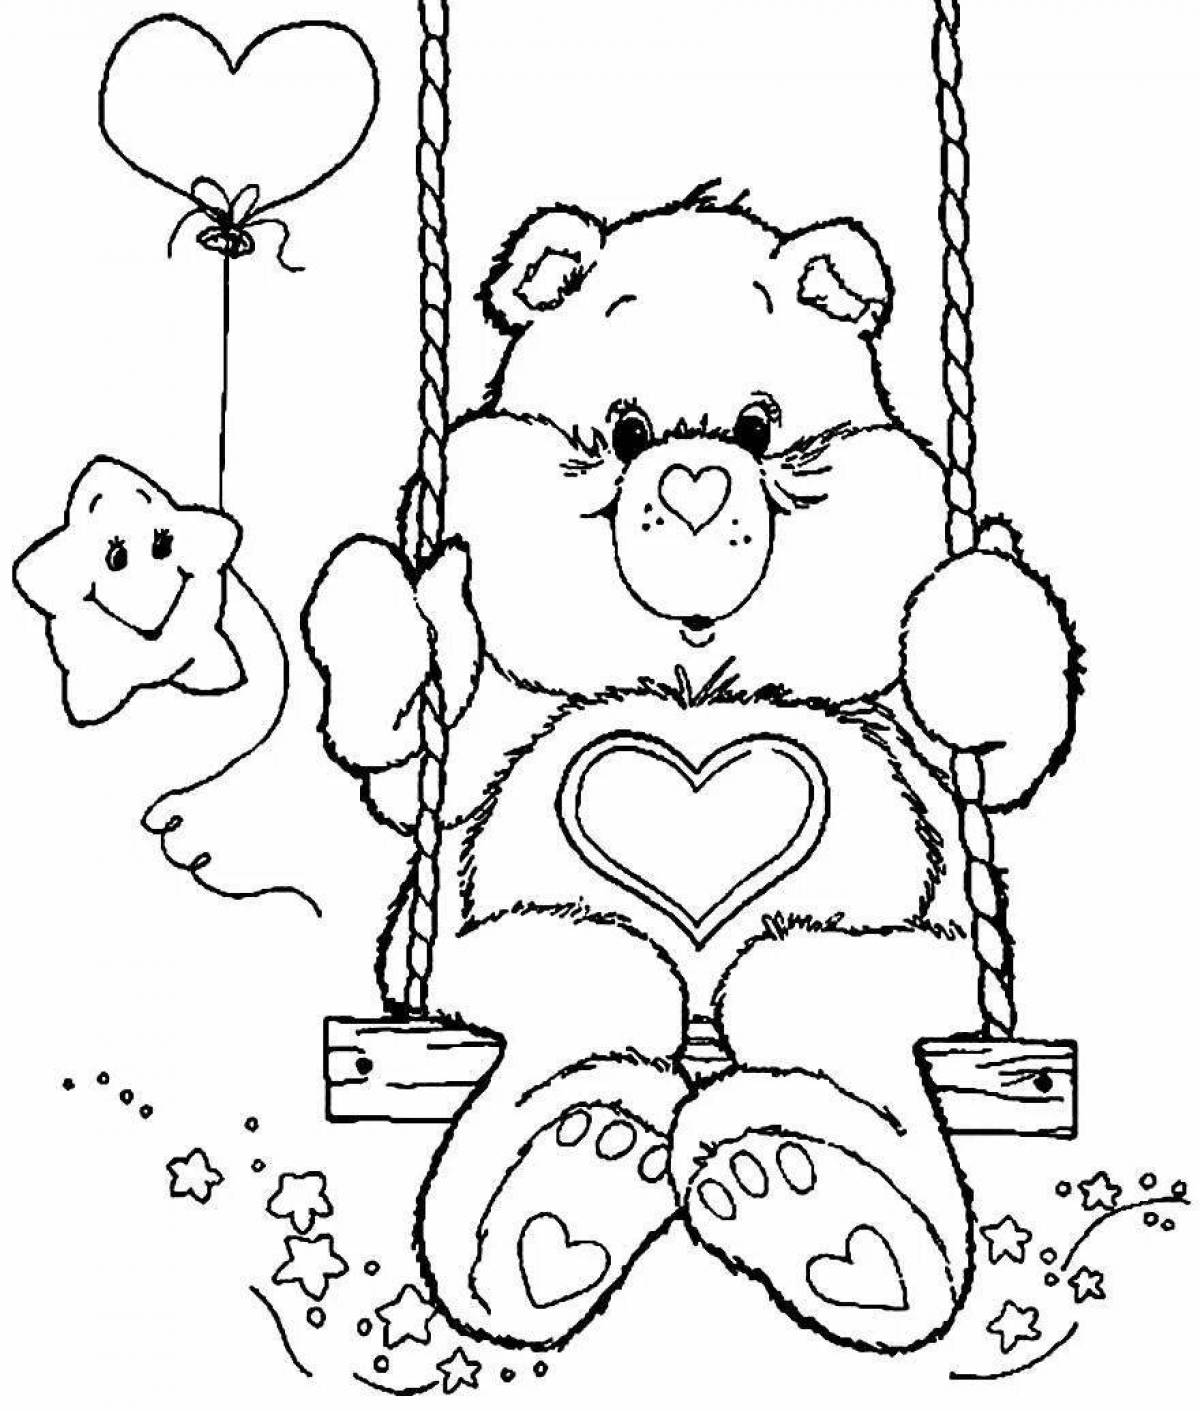 Coloring bear with a heart